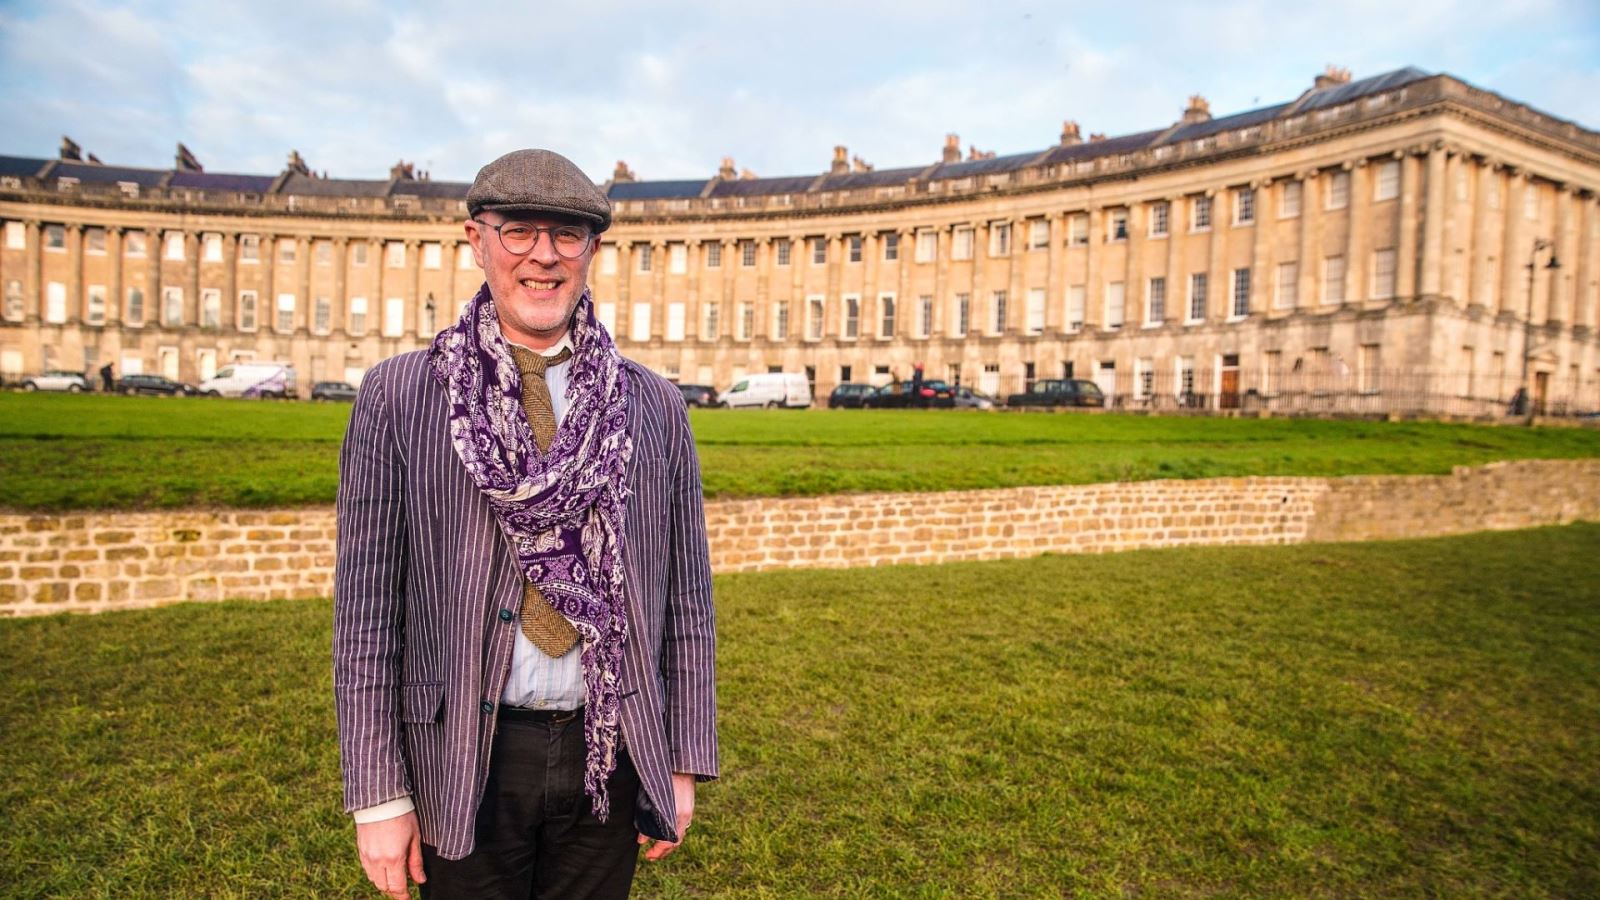 Mike James from Savouring Bath standing in front of Bath's Royal Crescent